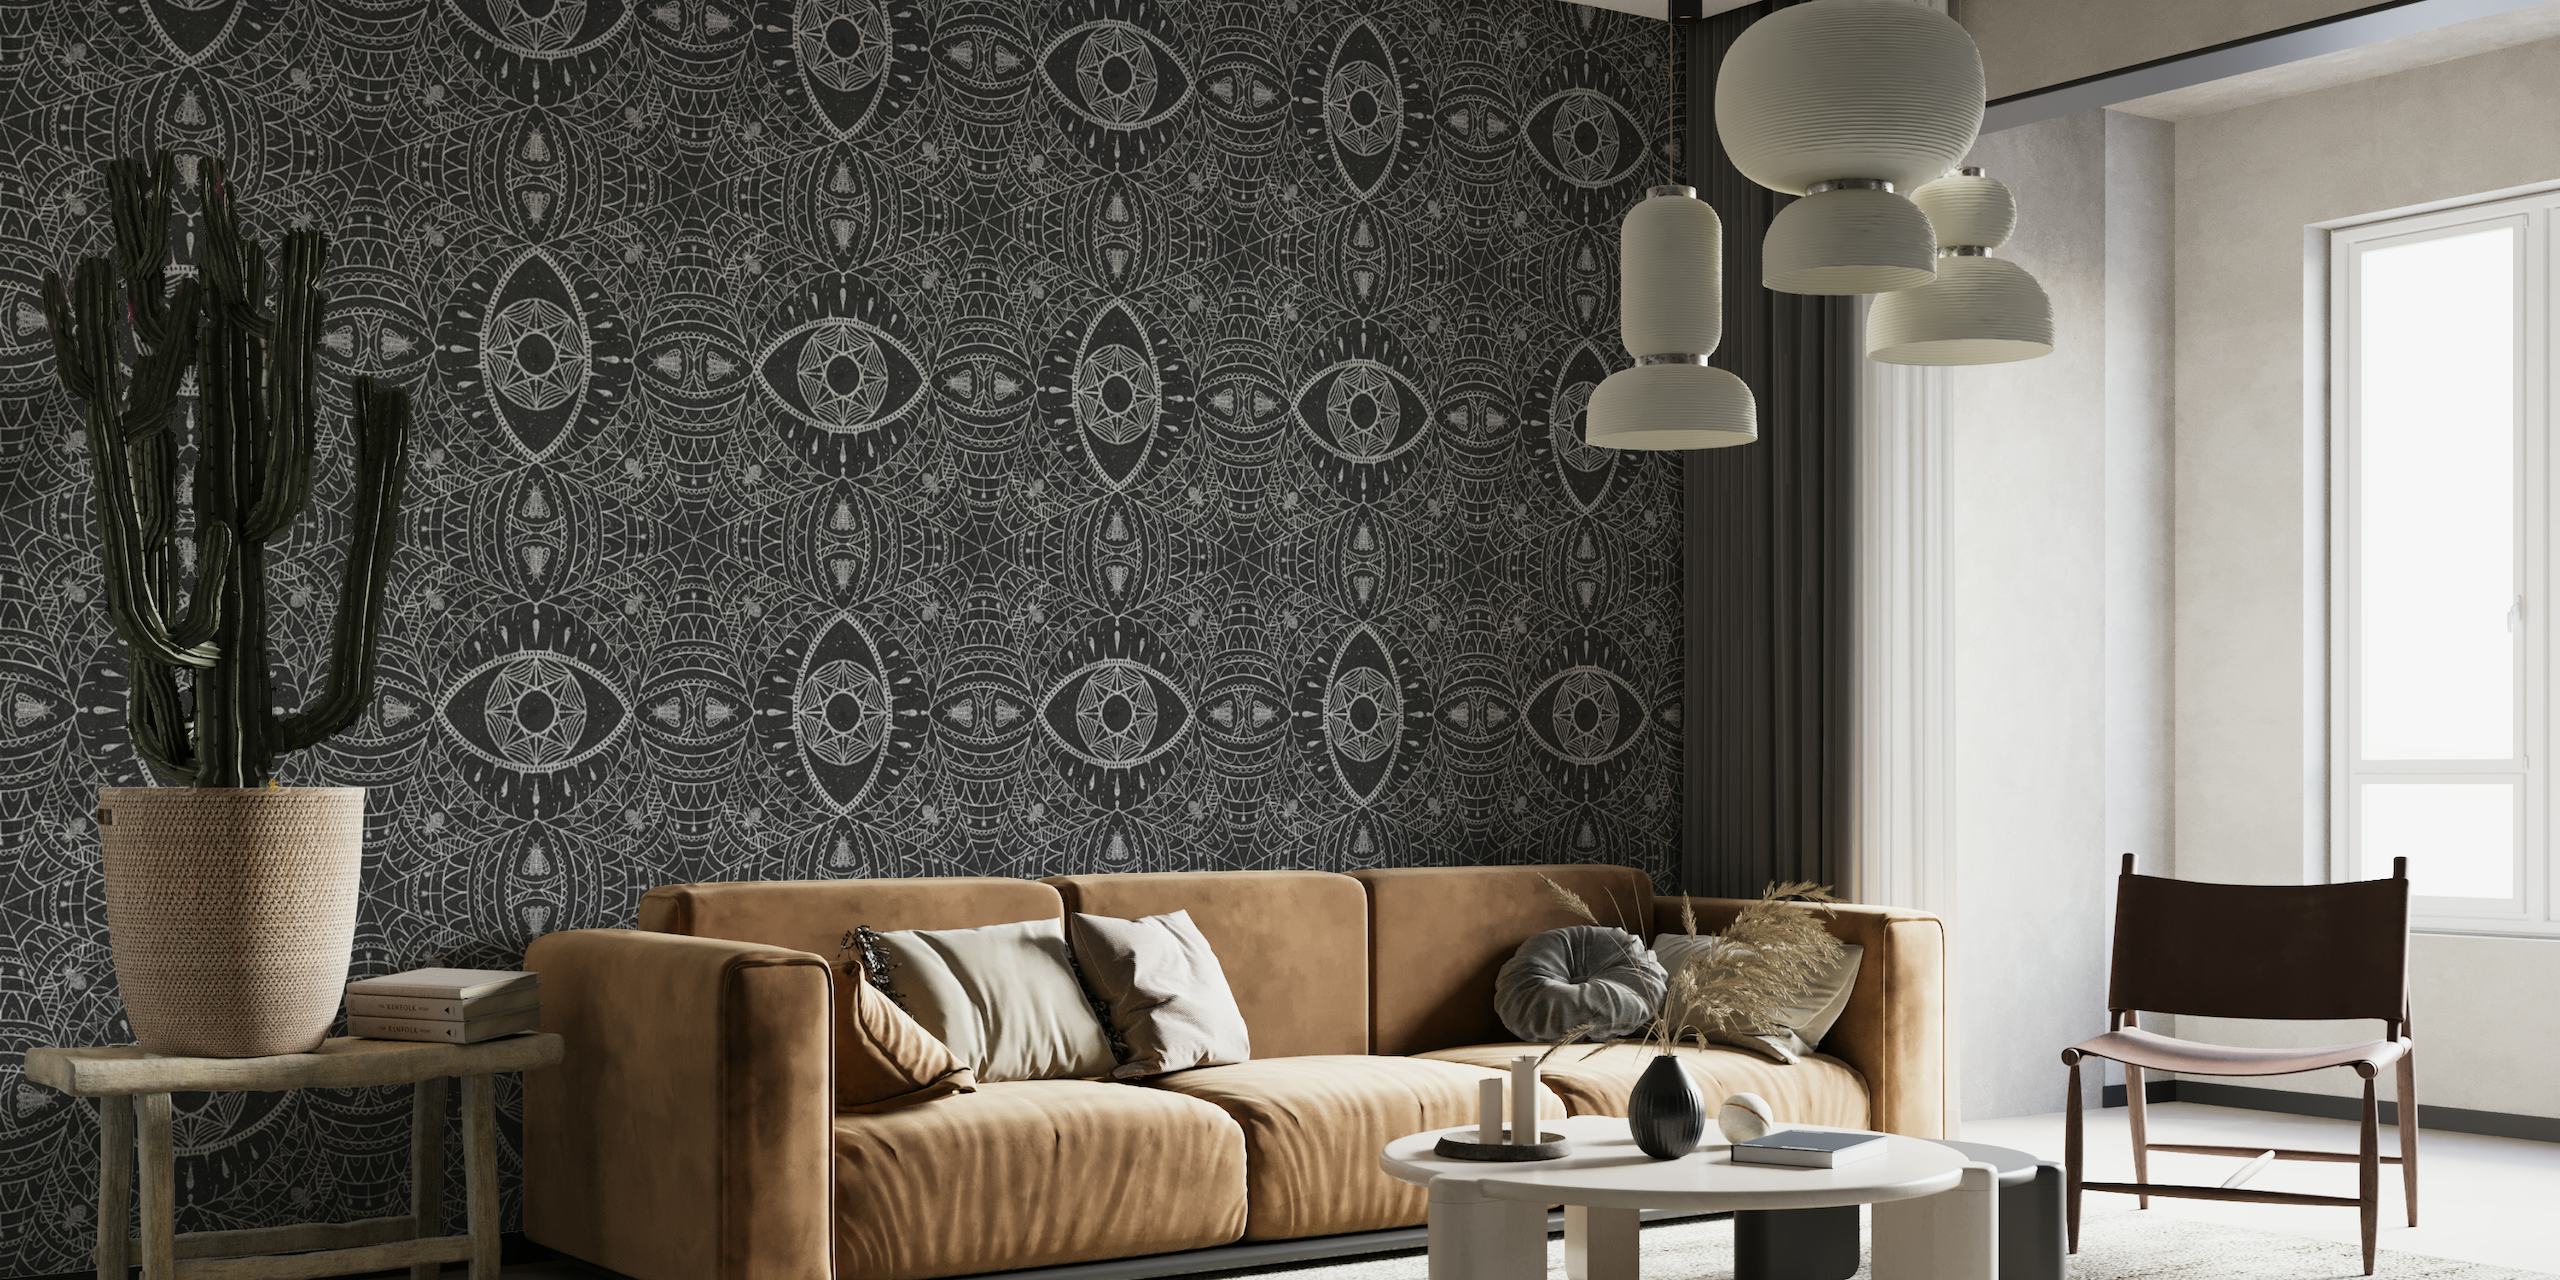 Goth-inspired black wall mural depicting whimsical spider webs and stylized eyes